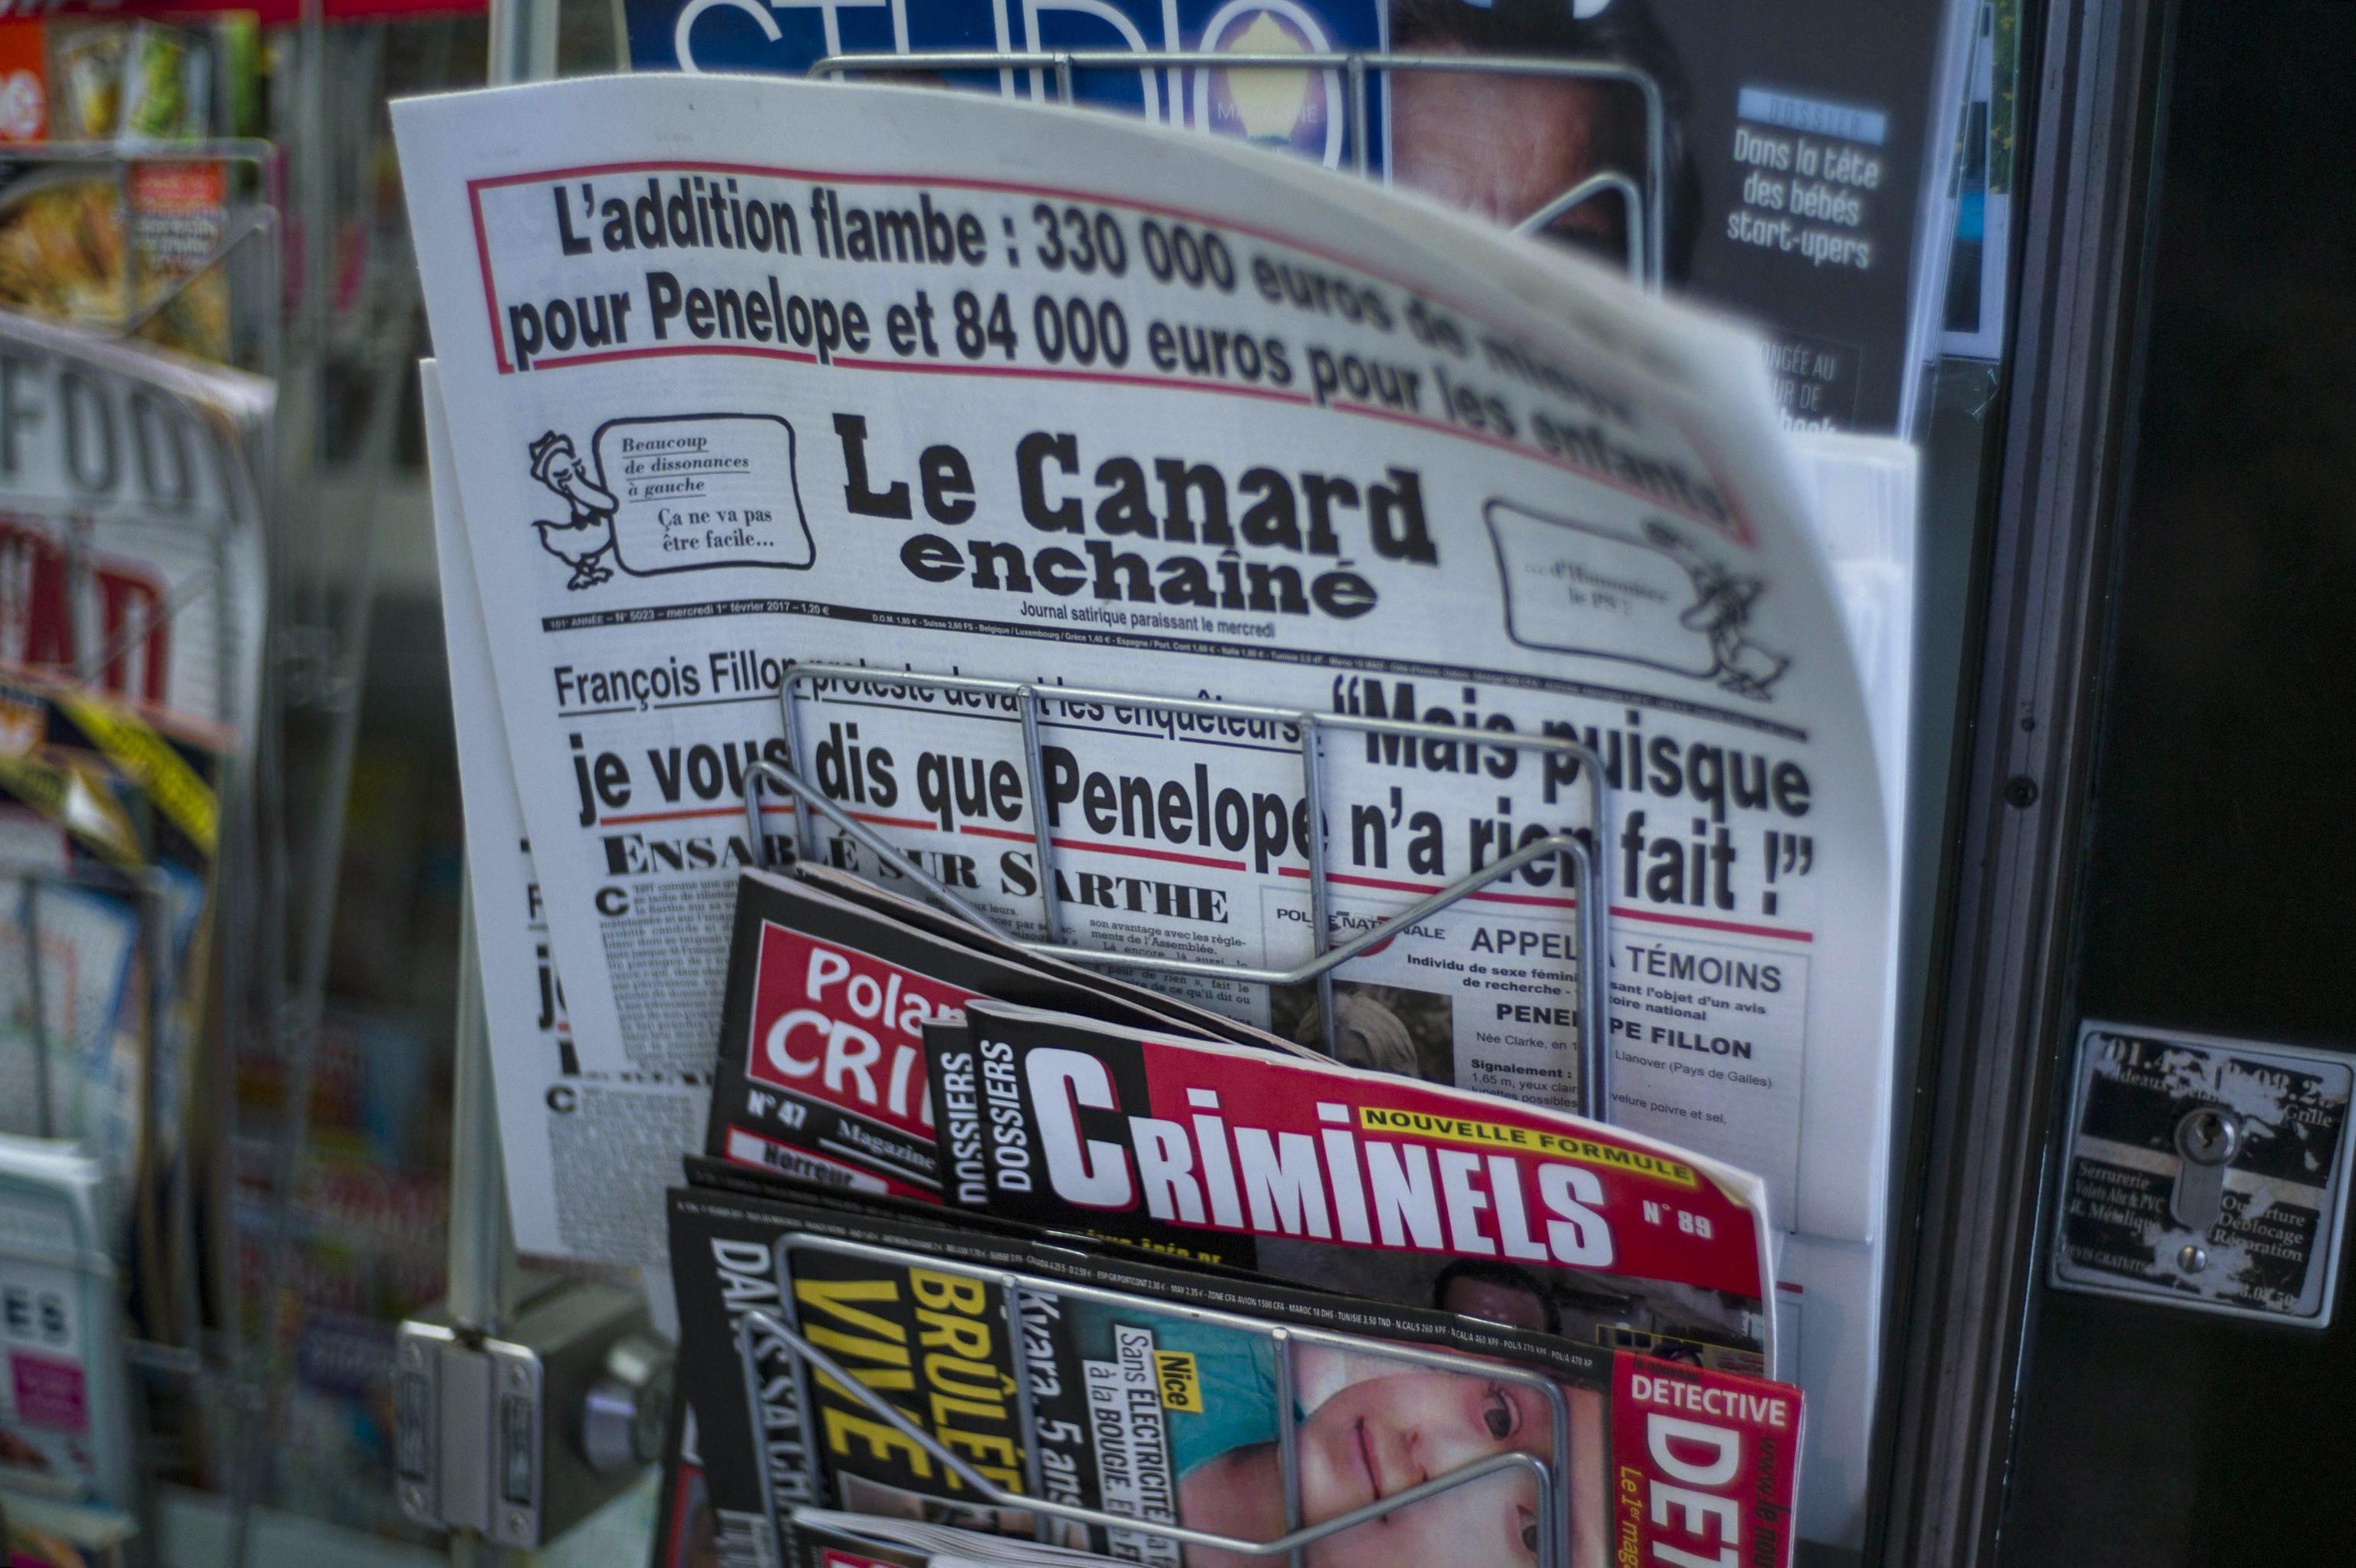 Le Canard enchaine newspaper frontpage